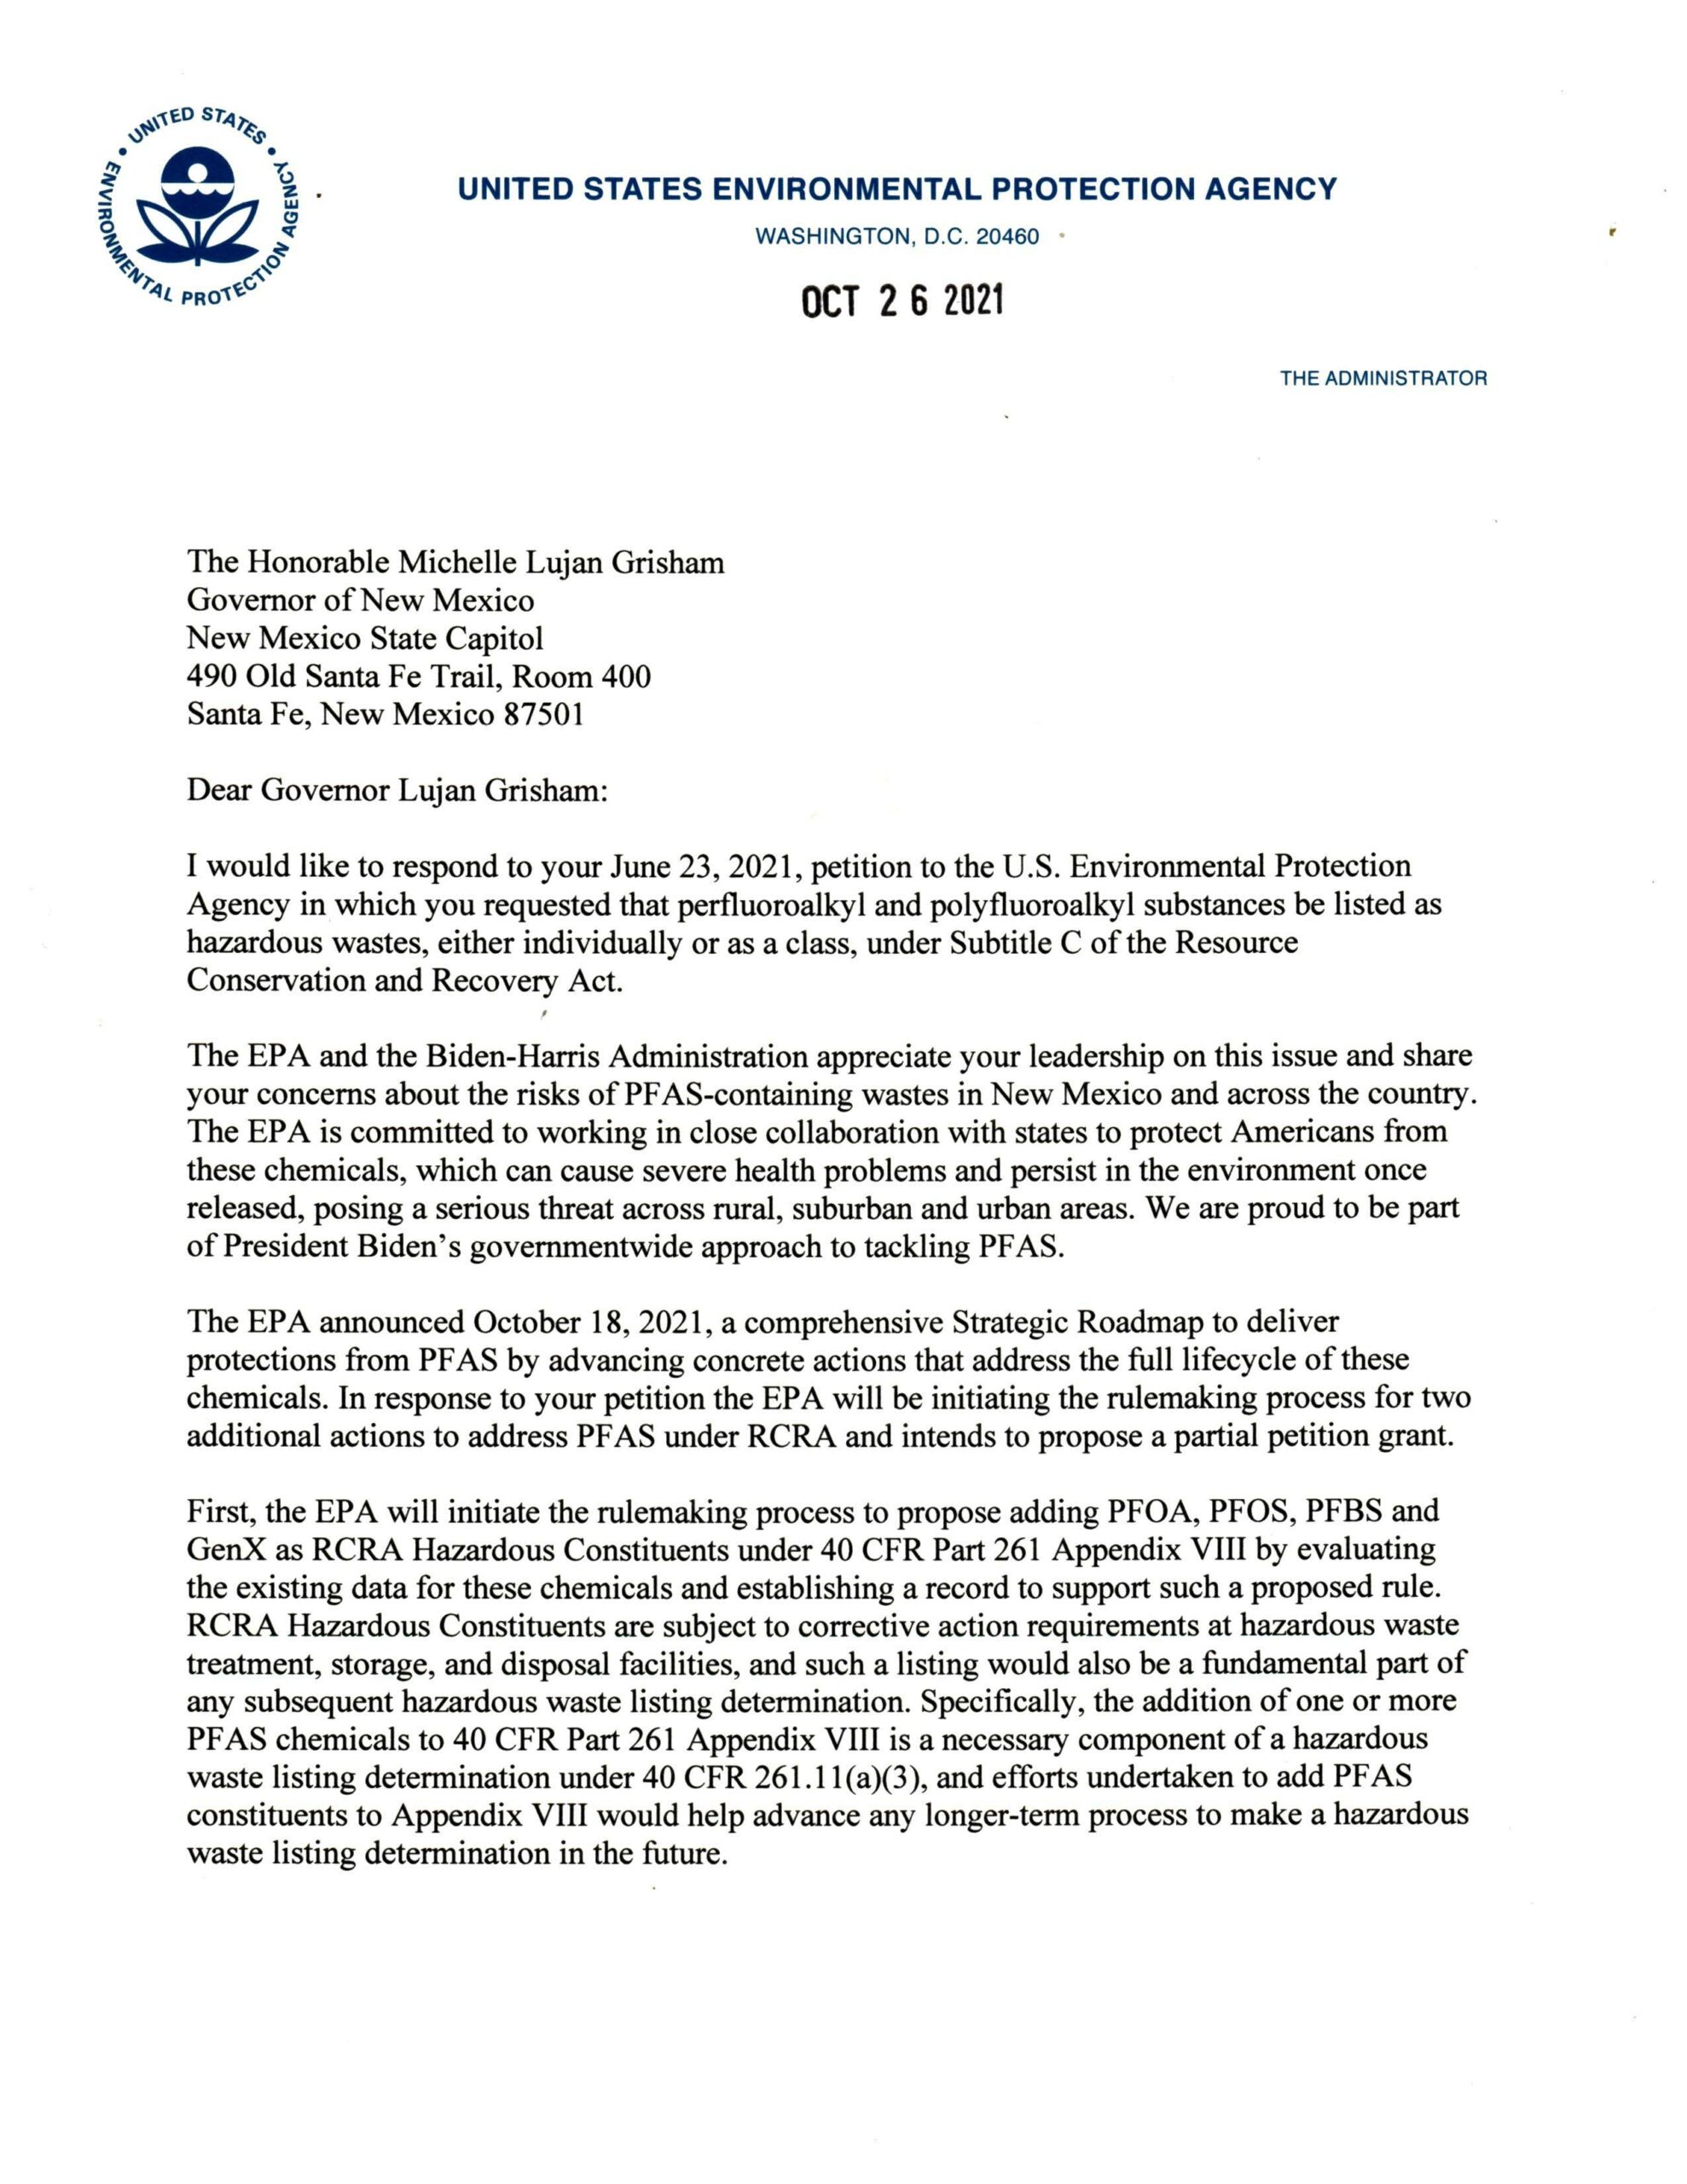 Letter from EPA Administrator Michael Regan about PFAS